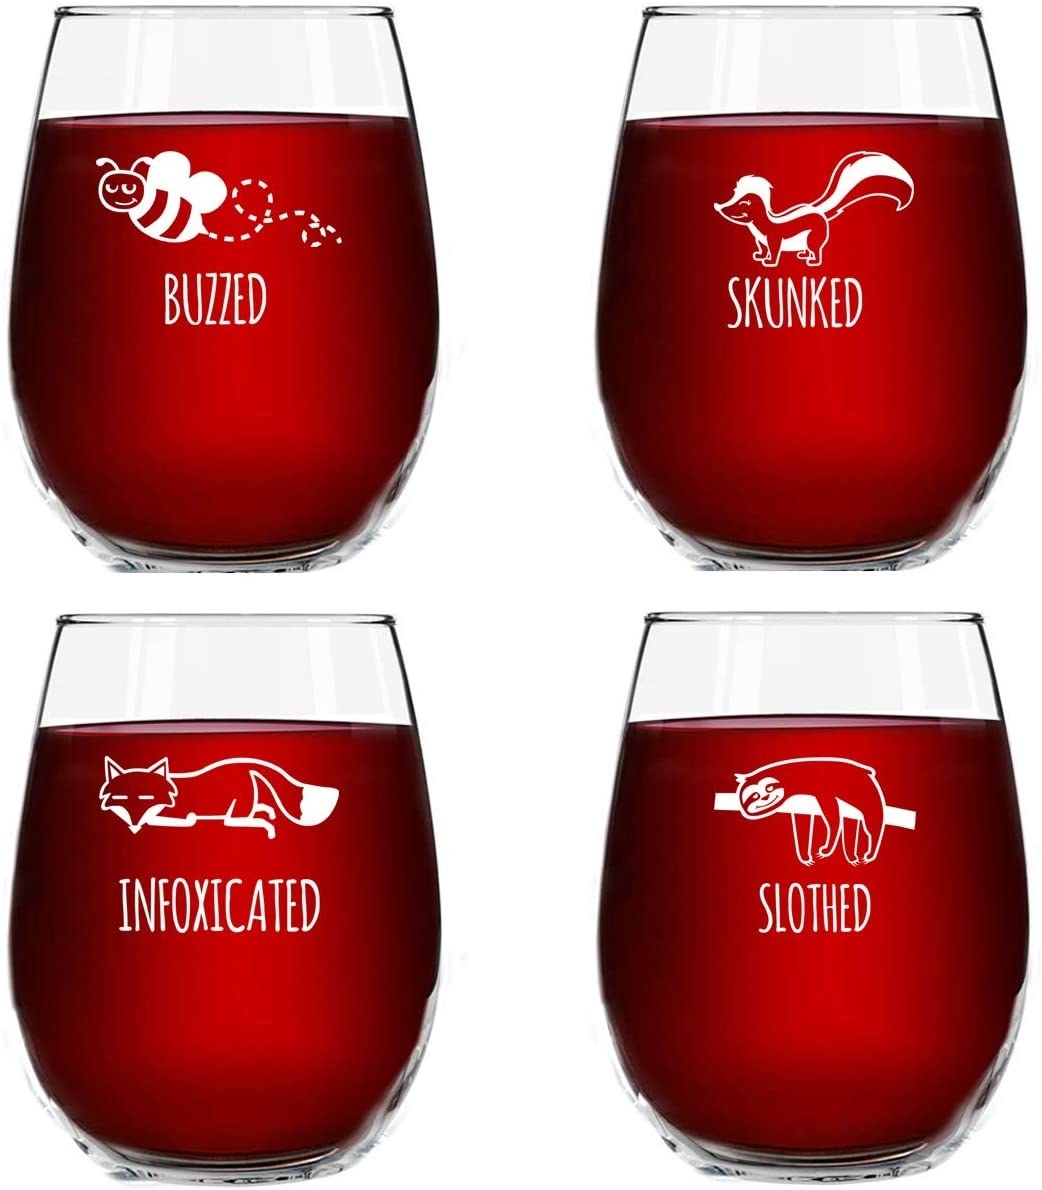 Four wine glasses one with a bee that says buzzed one with a skunk that says skunked one with a fox that says intoxicated and one with a sloth that says slothed